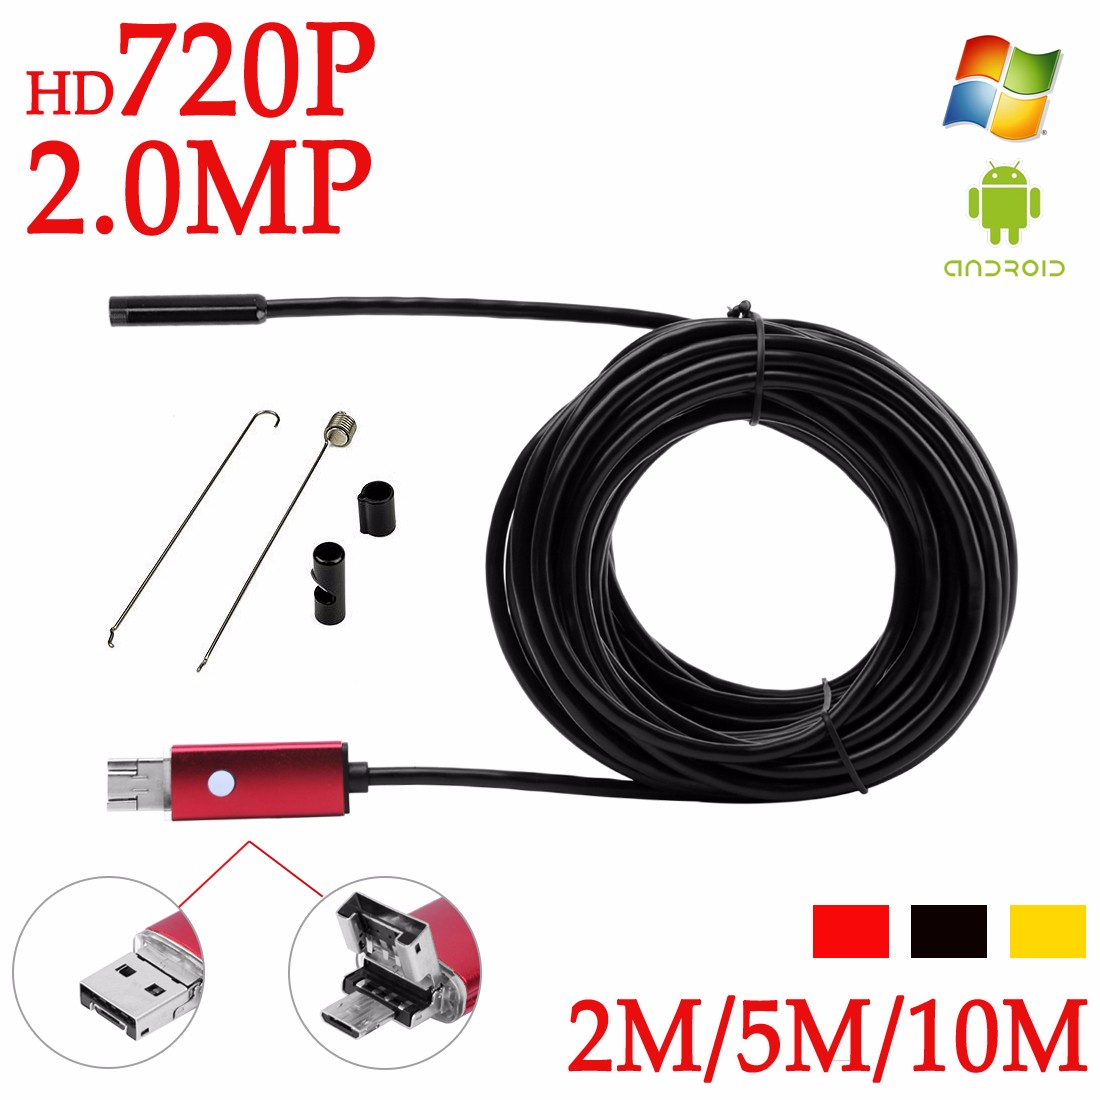 A99 720P 2MP Waterproof Android/PC Endoscope Tube Camera